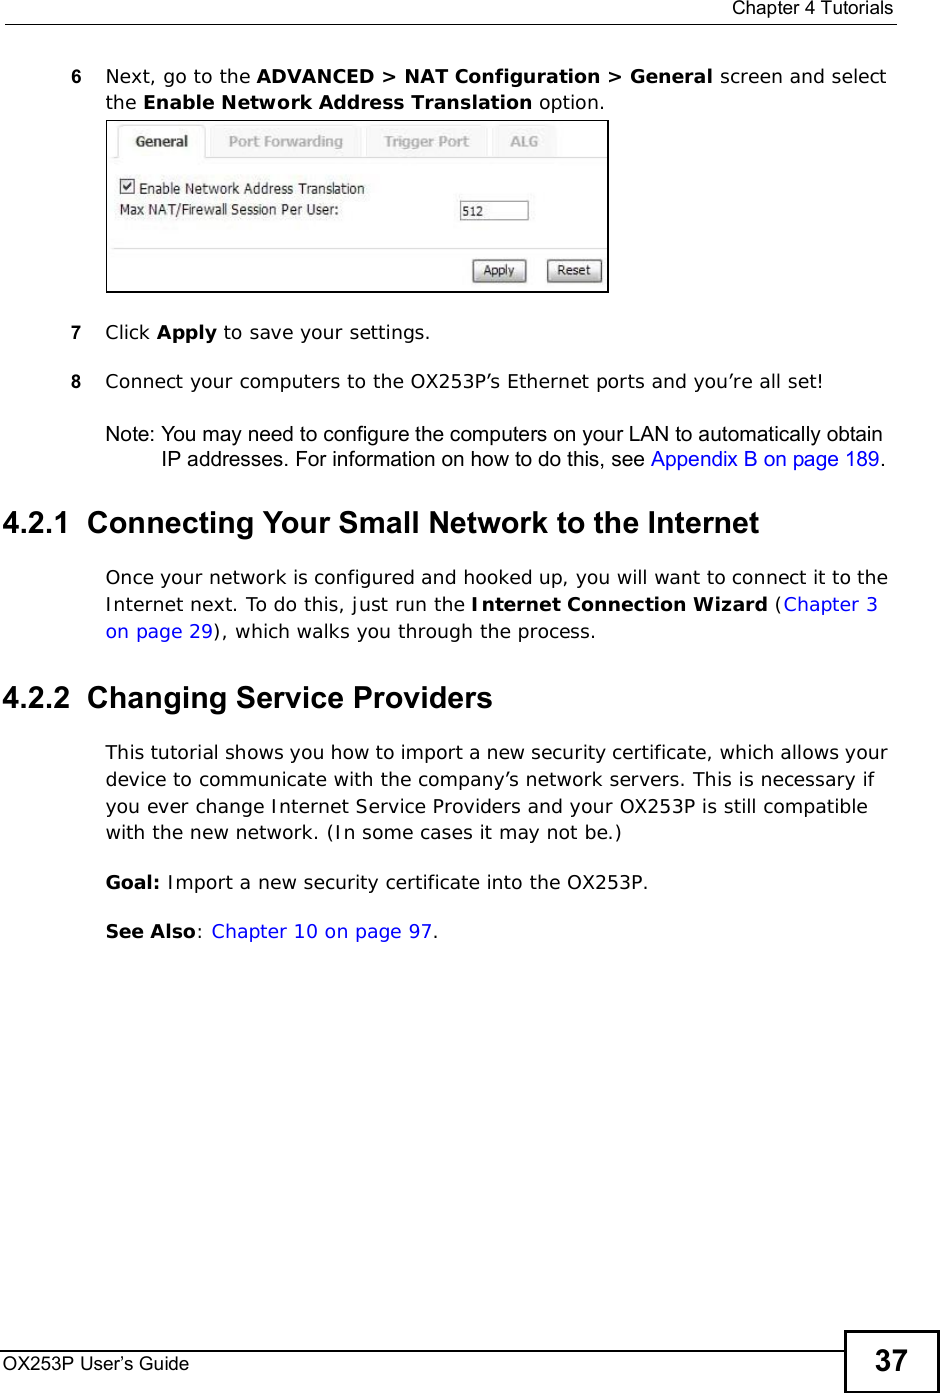  Chapter 4TutorialsOX253P User’s Guide 376Next, go to the ADVANCED &gt; NAT Configuration &gt; General screen and select the Enable Network Address Translation option.7Click Apply to save your settings.8Connect your computers to the OX253P’s Ethernet ports and you’re all set!Note: You may need to configure the computers on your LAN to automatically obtain IP addresses. For information on how to do this, see Appendix B on page 189.4.2.1  Connecting Your Small Network to the InternetOnce your network is configured and hooked up, you will want to connect it to the Internet next. To do this, just run the Internet Connection Wizard (Chapter 3 on page 29), which walks you through the process.4.2.2  Changing Service ProvidersThis tutorial shows you how to import a new security certificate, which allows your device to communicate with the company’s network servers. This is necessary if you ever change Internet Service Providers and your OX253P is still compatible with the new network. (In some cases it may not be.)Goal: Import a new security certificate into the OX253P.See Also:Chapter 10 on page 97.